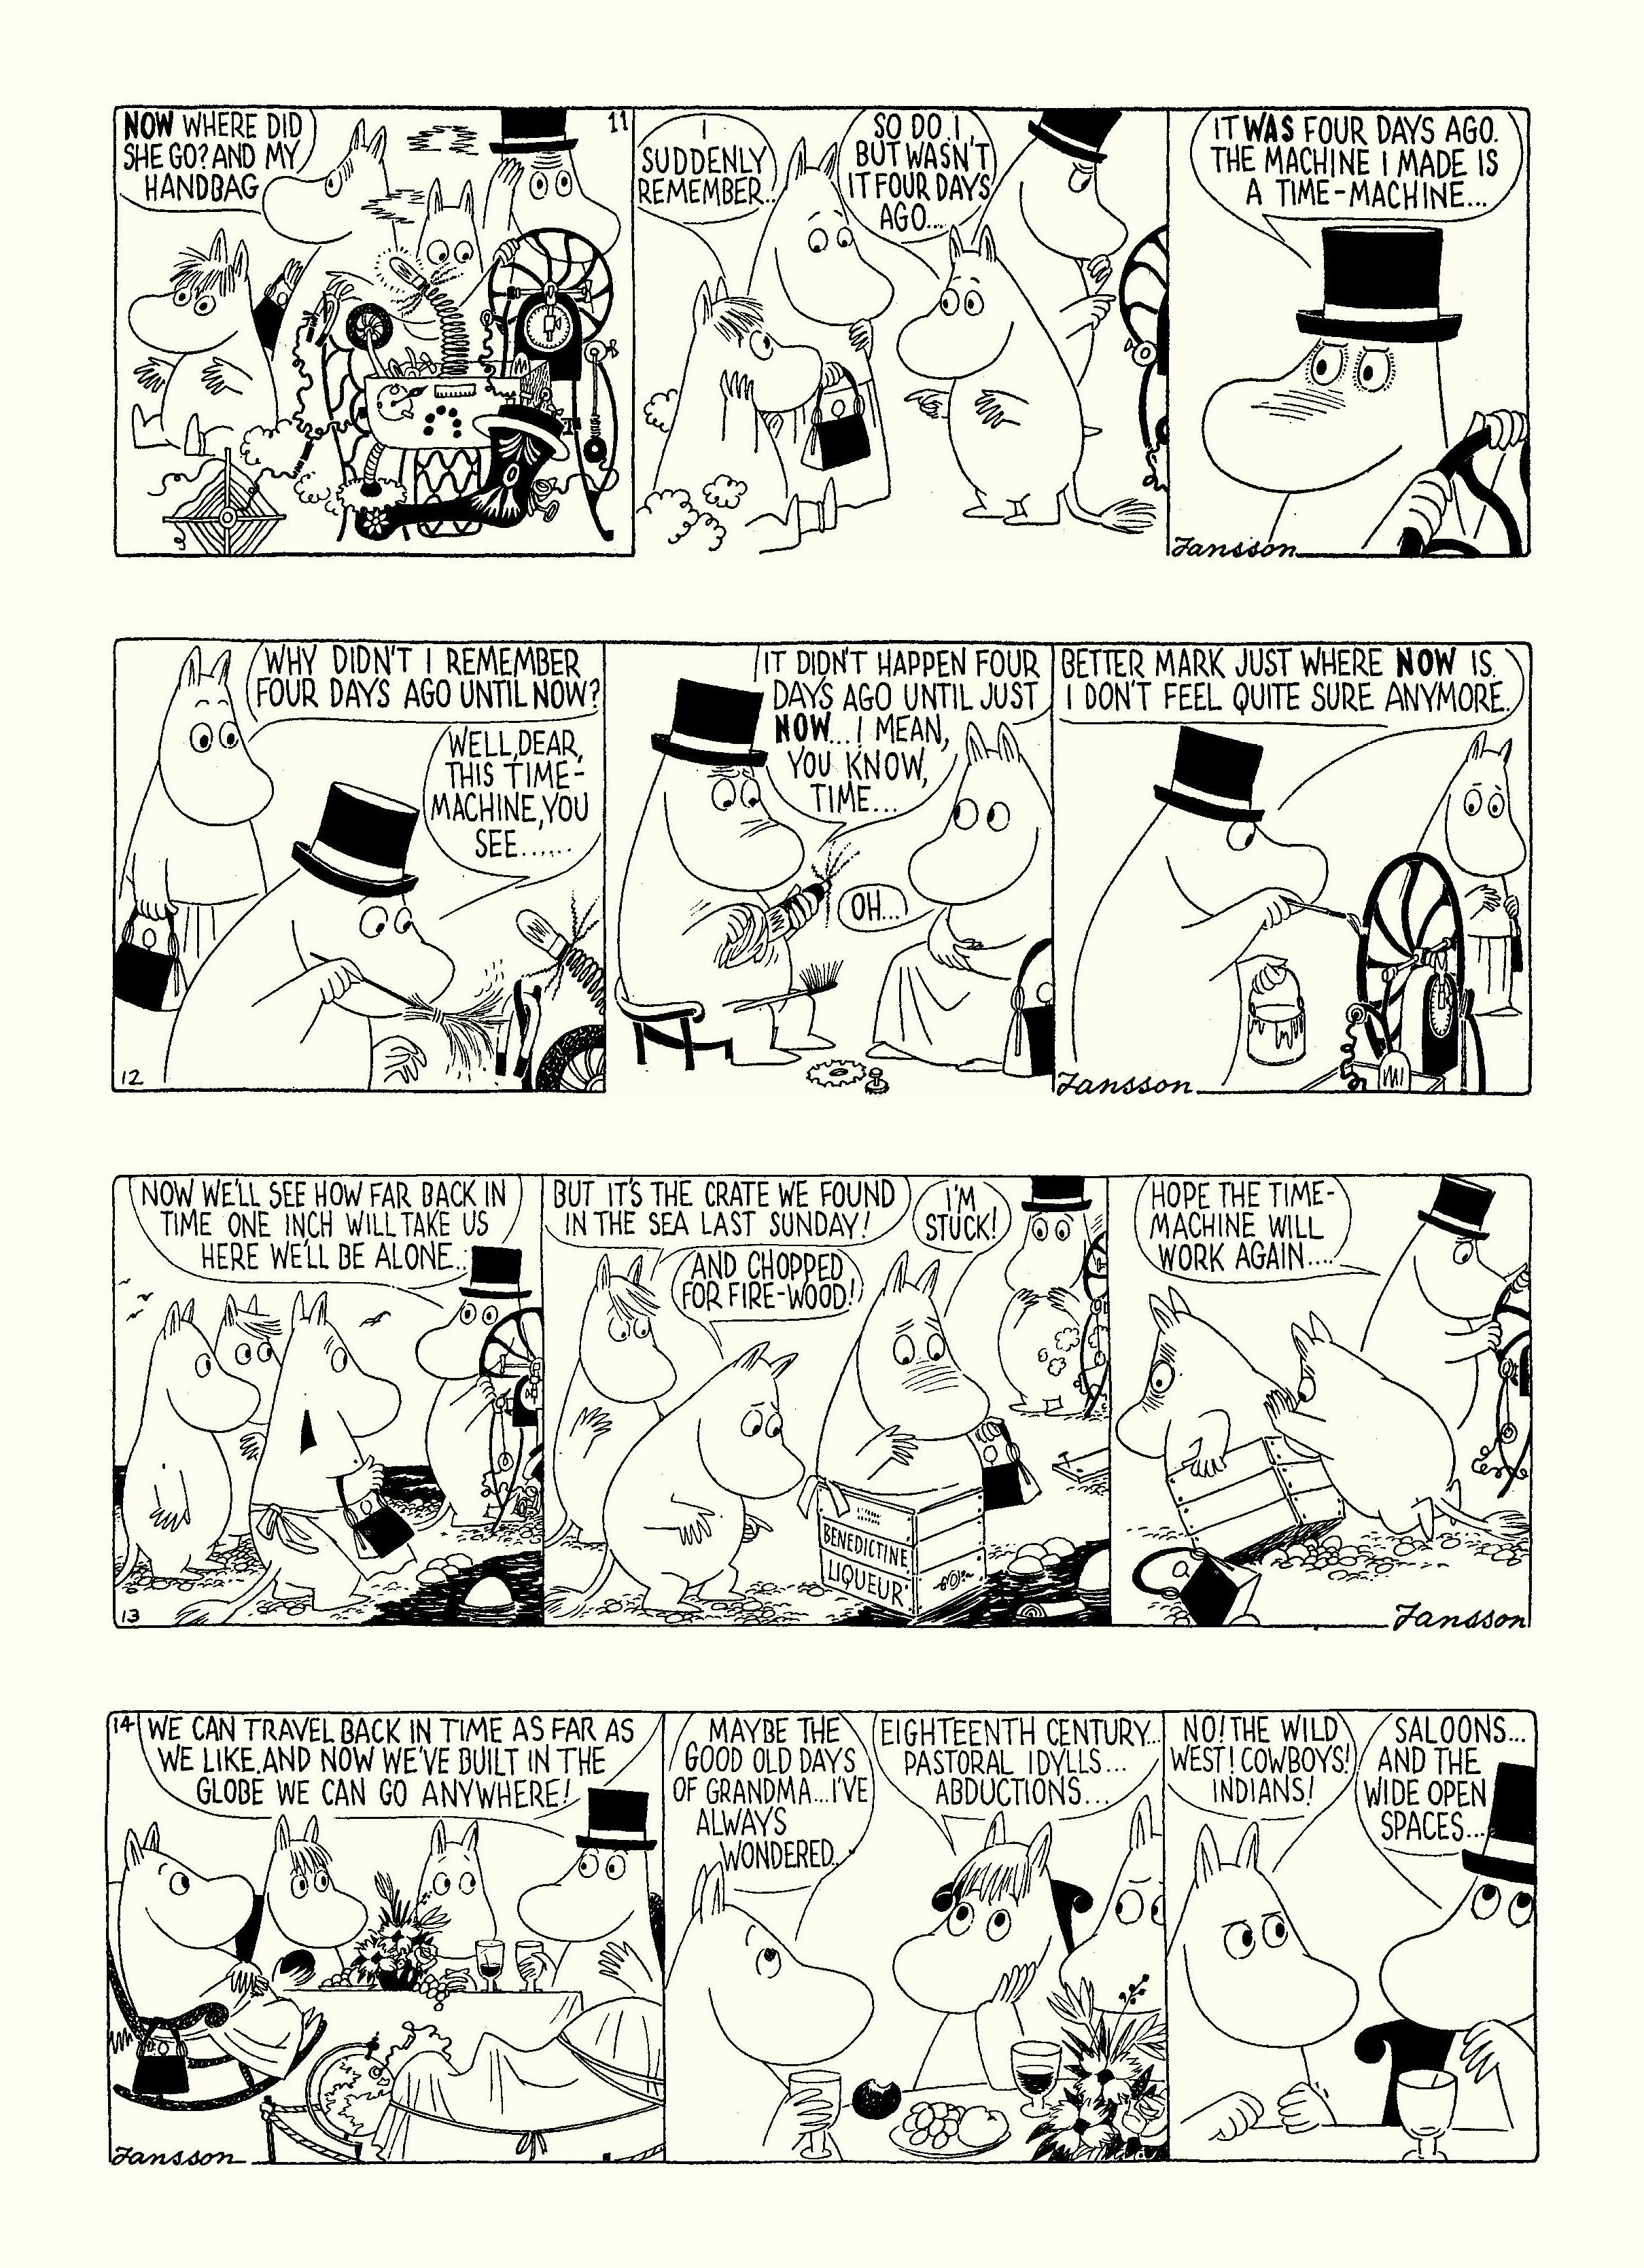 Read online Moomin: The Complete Tove Jansson Comic Strip comic -  Issue # TPB 4 - 9